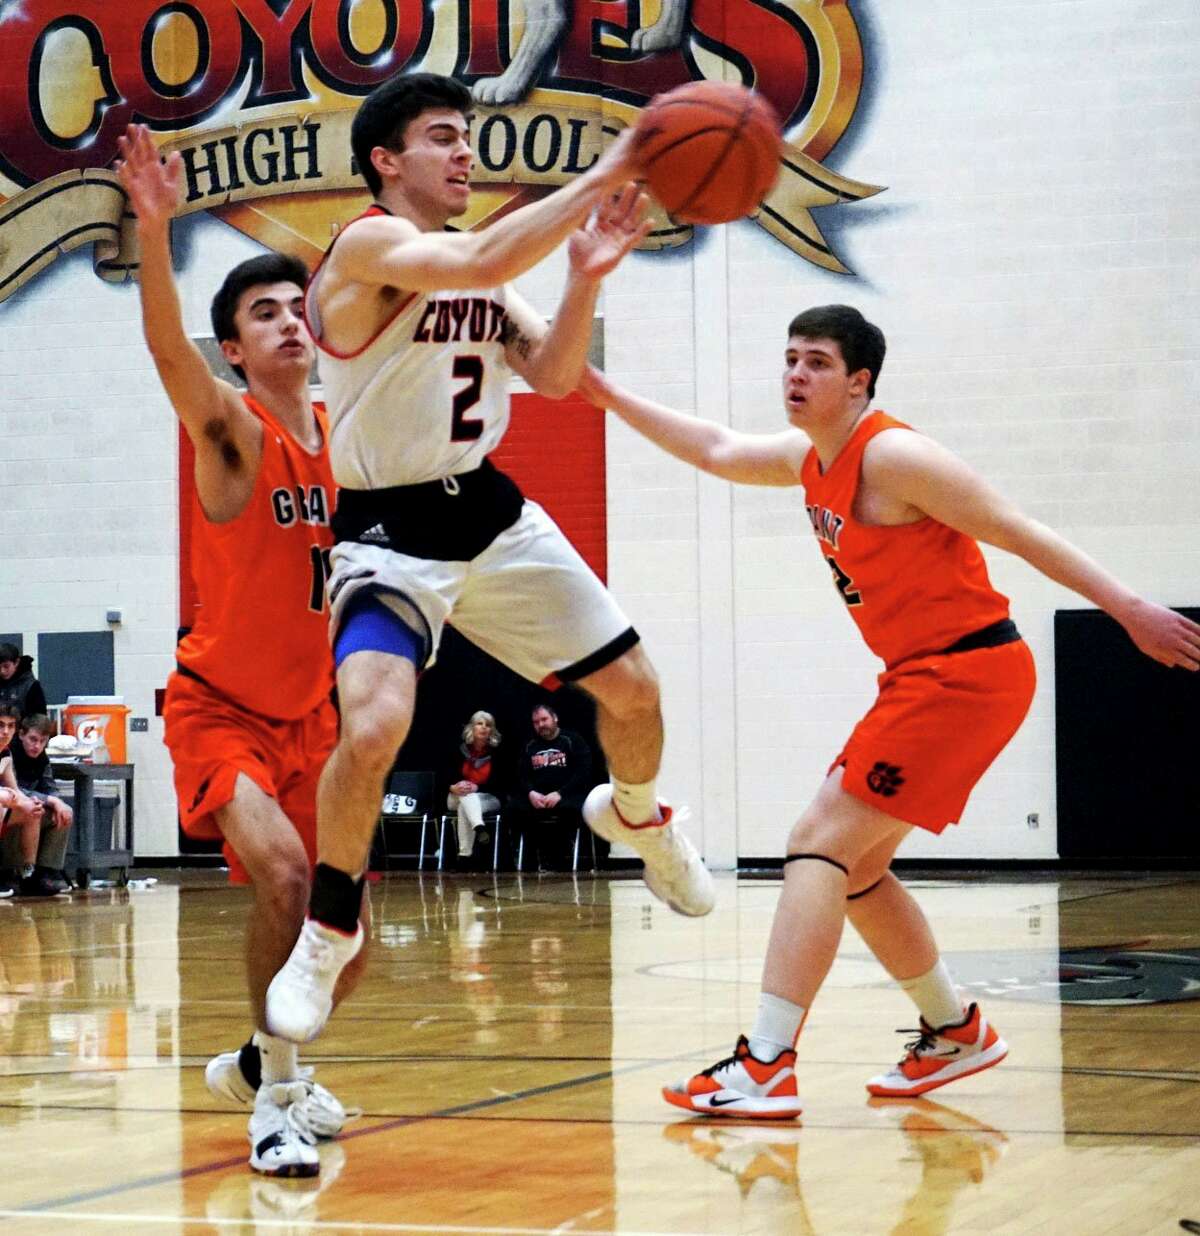 Senior Zac Saez of Reed City passes the ball while airborne during the Coyotes' 63-48 loss to Grant on Friday evening at home. (Pioneer photo/Joe Judd)